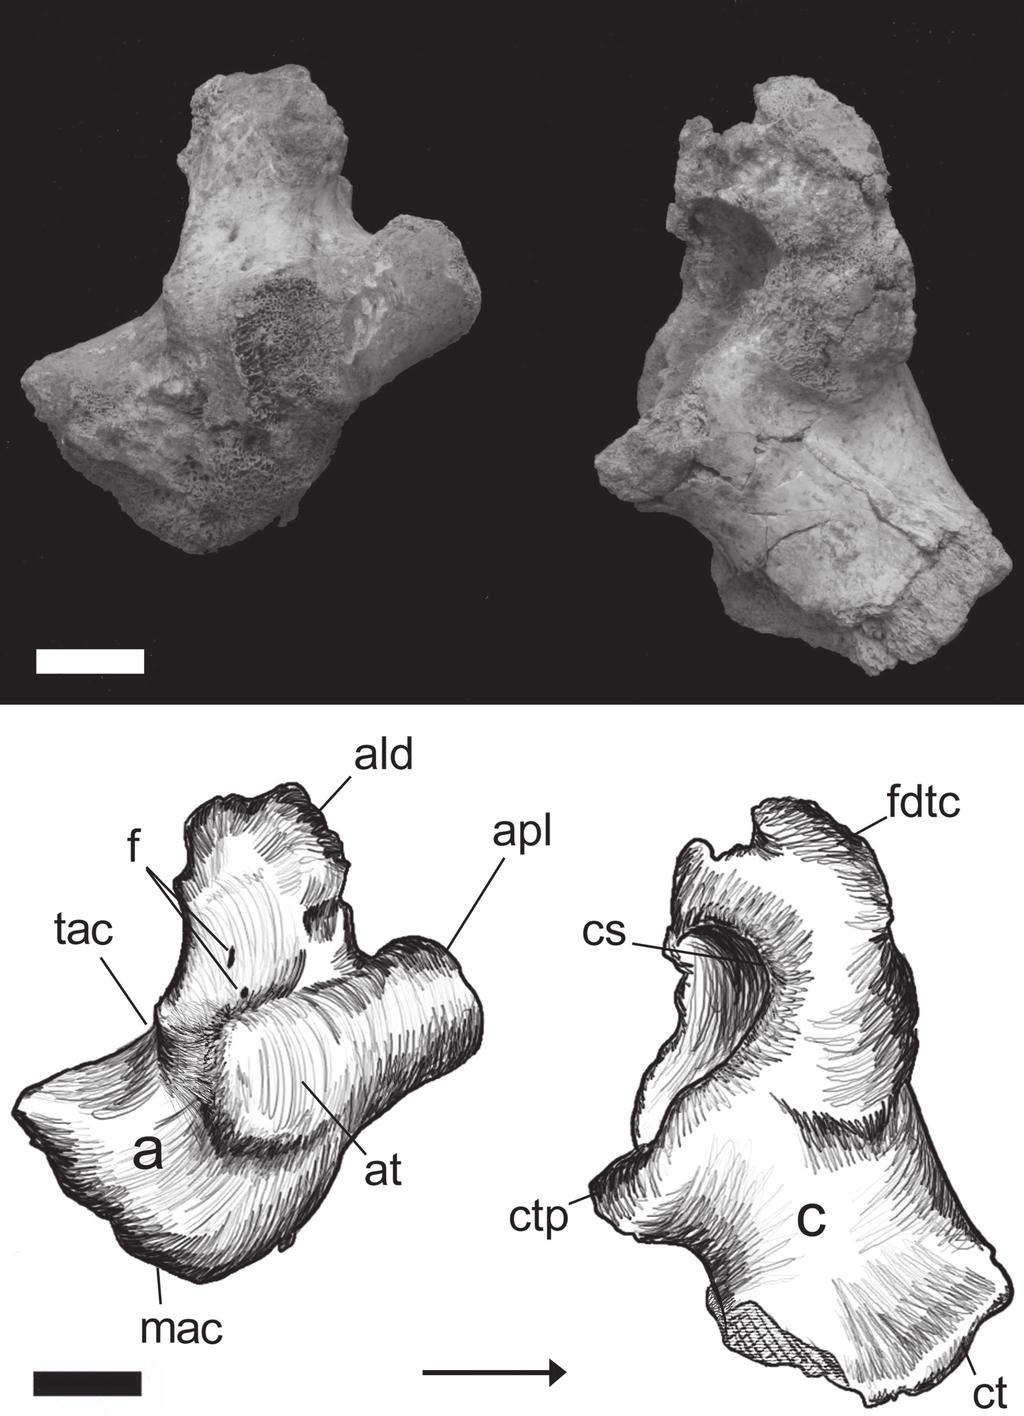 Papéis Avulsos de Zoologia, 50(21), 2010 355 Figure 28: Proximal tarsals of Baurusuchus albertoi, with the astragalus in anterodorsal view and the calcaneum in anteroventral view.